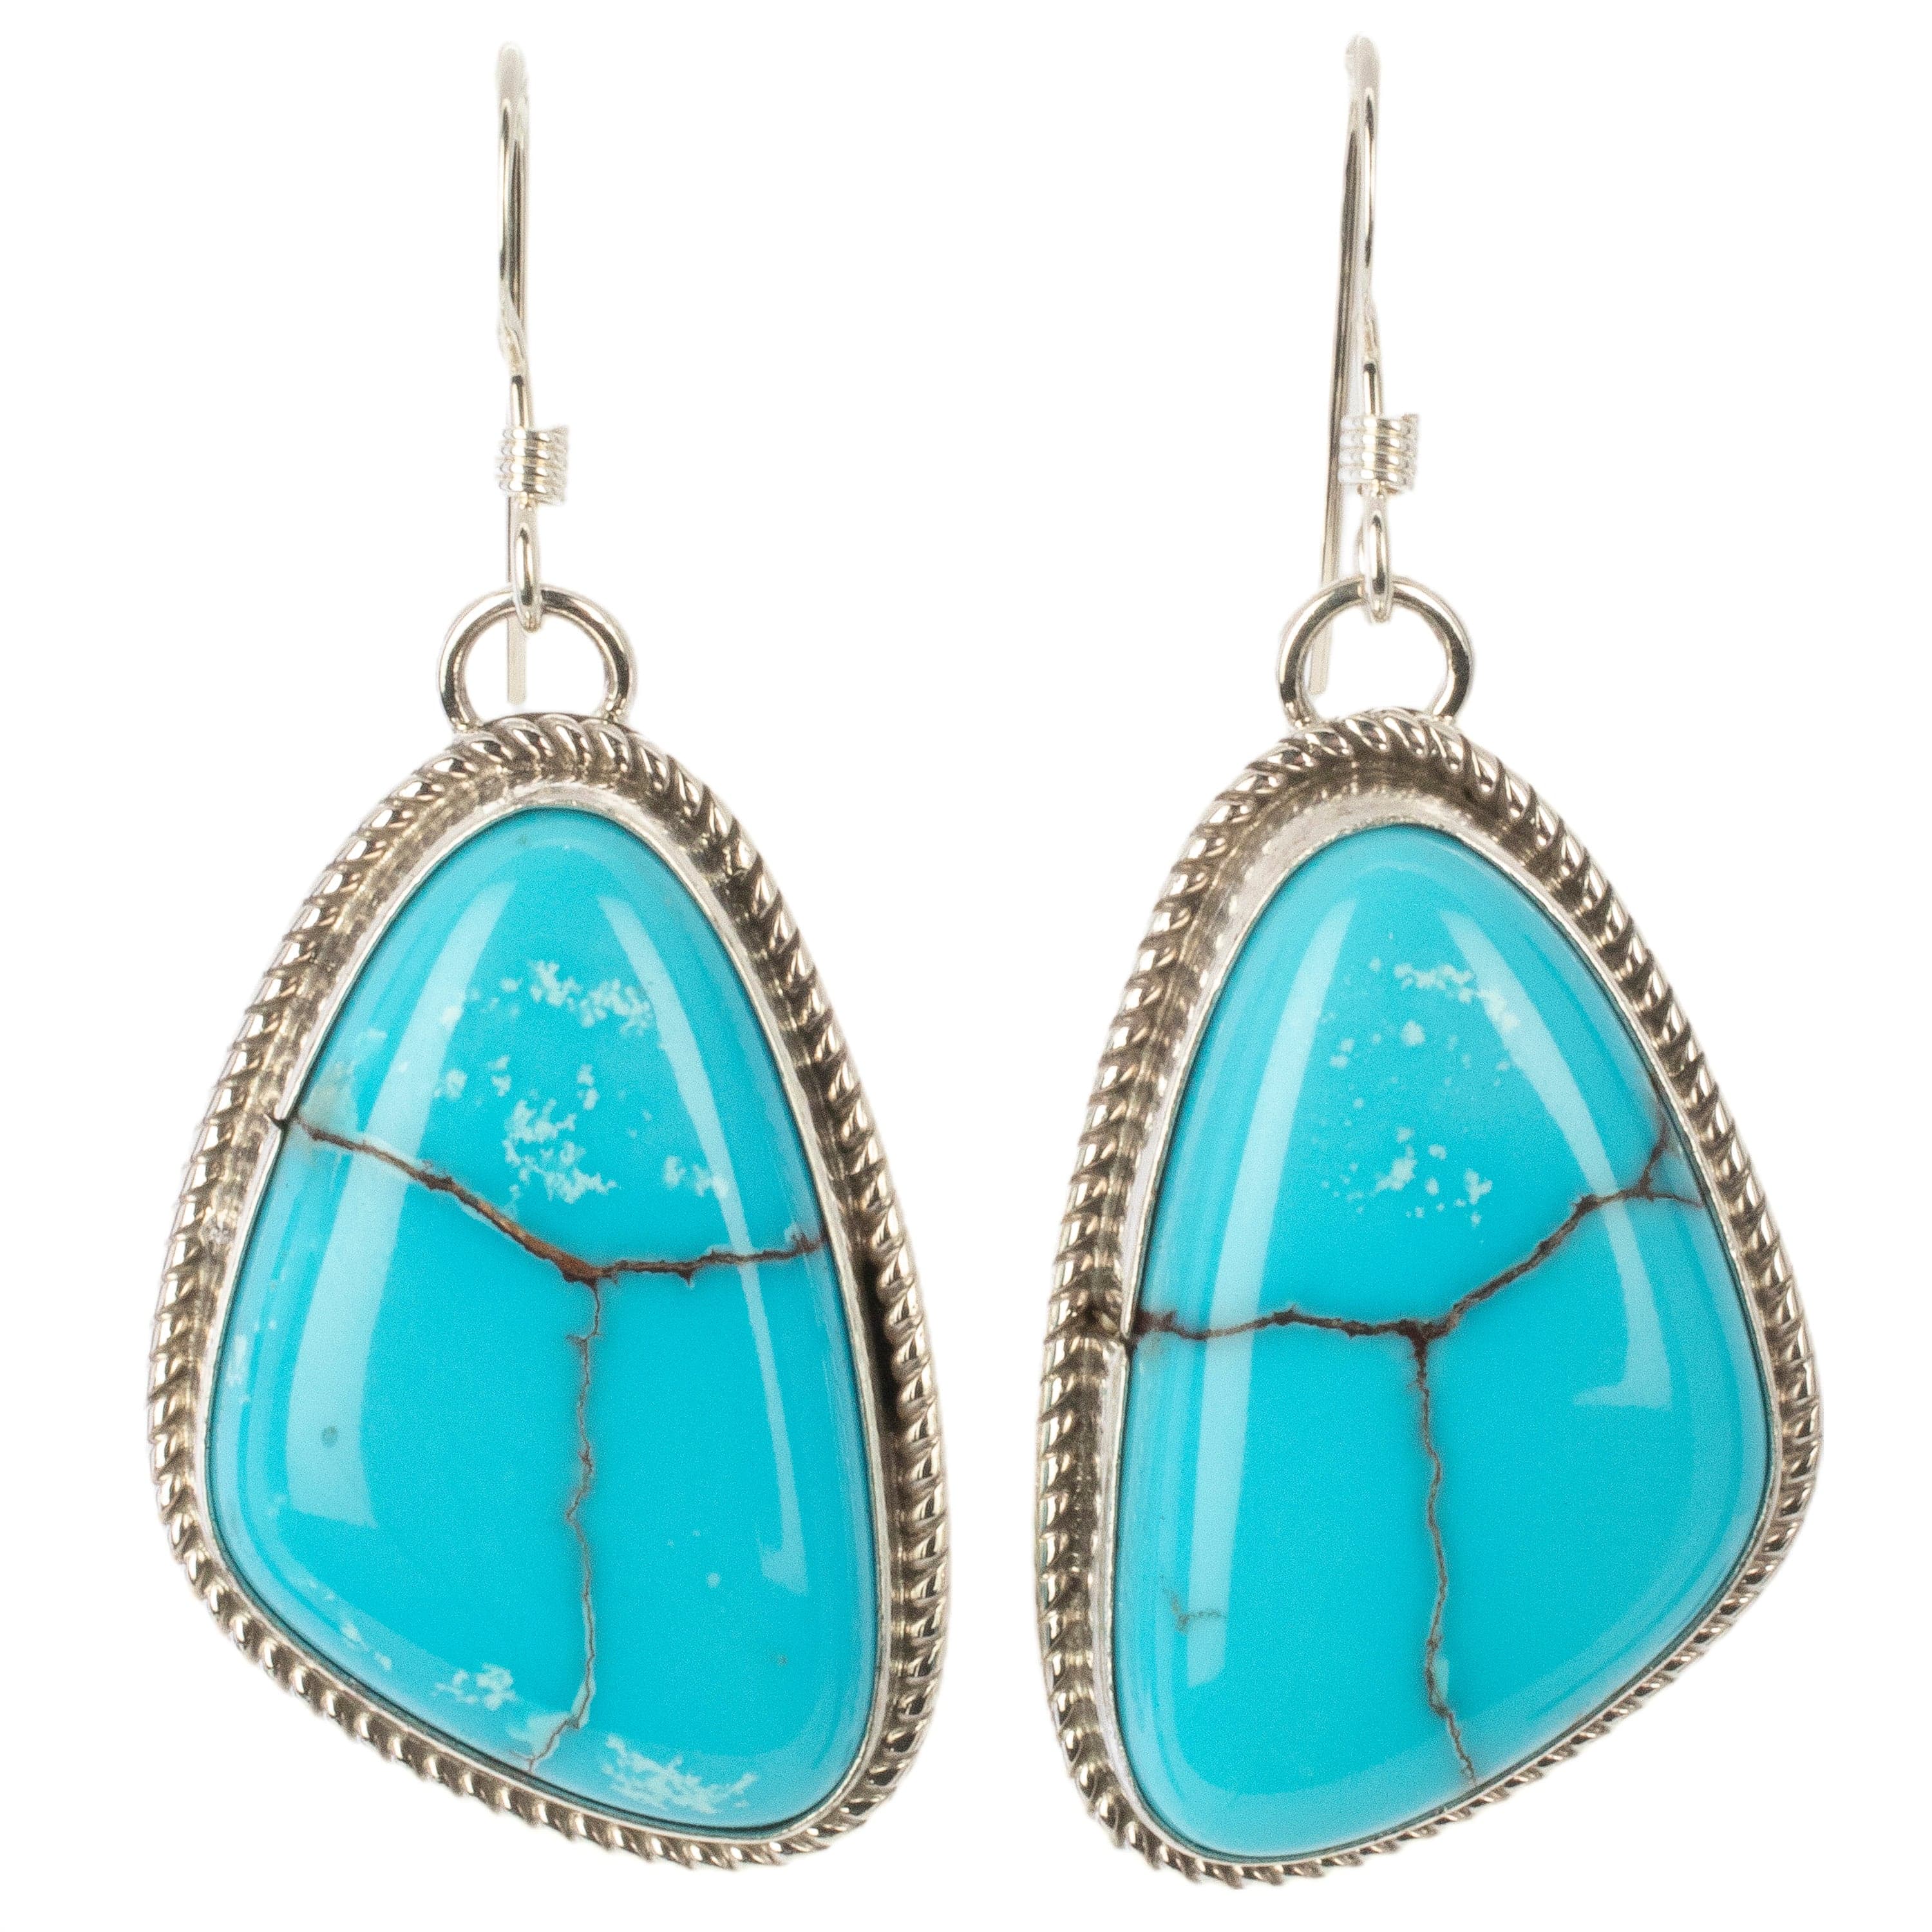 Kalifano Native American Jewelry Kingman Turquoise USA Native American Made 925 Sterling Silver Dangly Earrings with French Hook NAE600.017